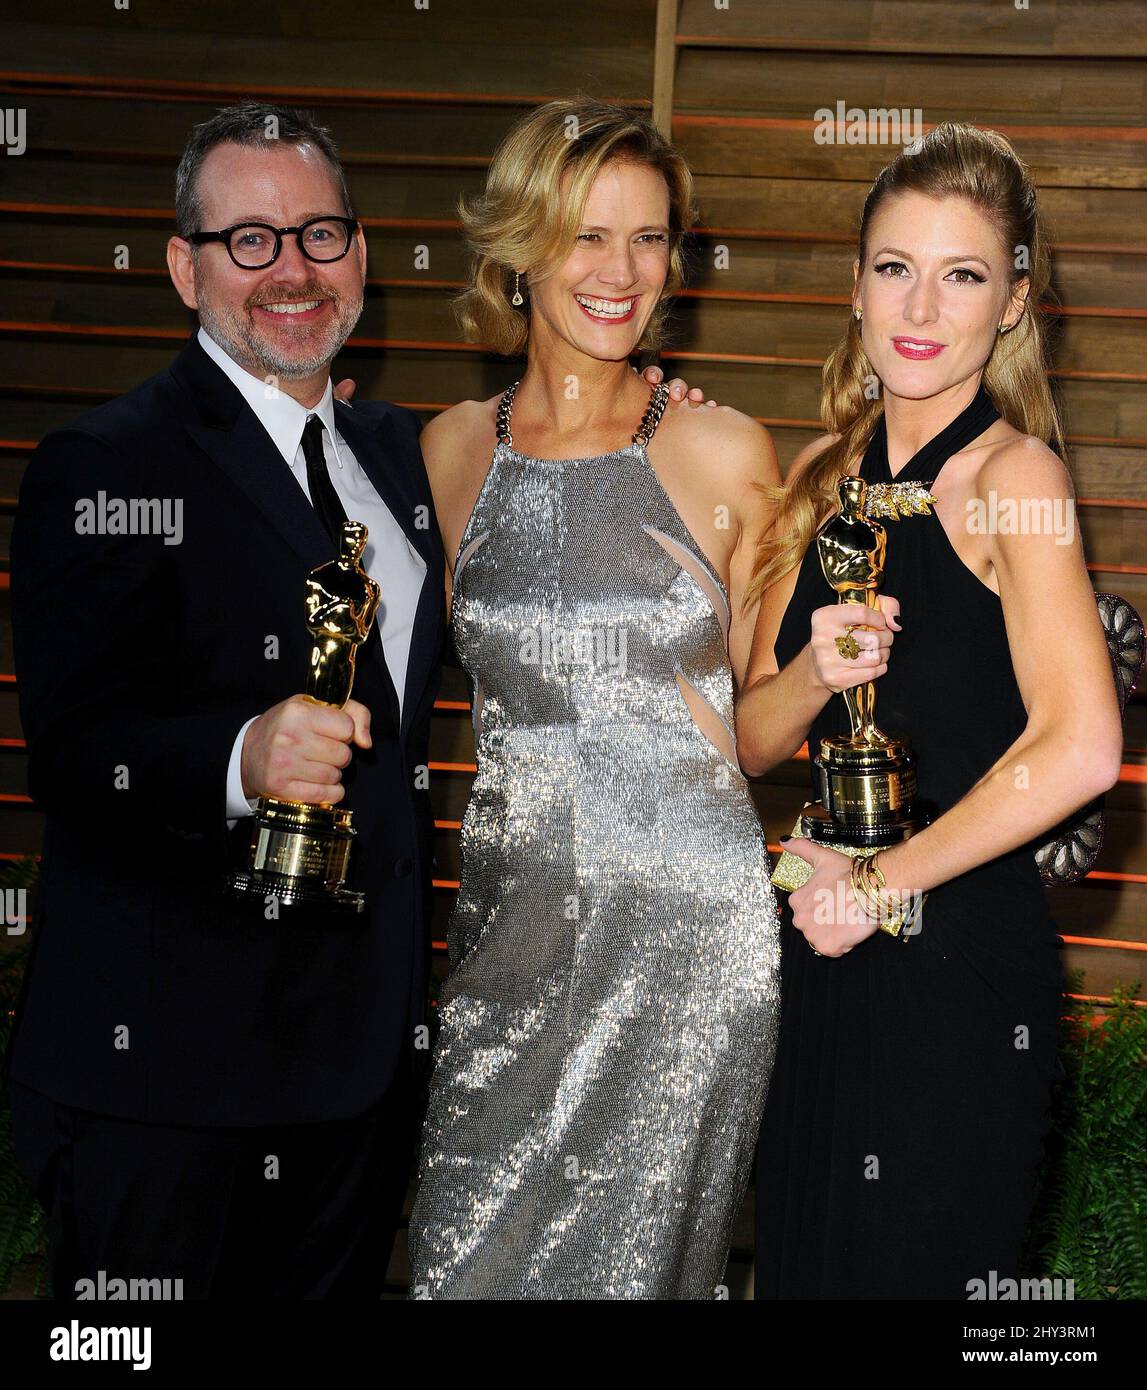 Morgan Neville, Janet Friesen and Caitrin Rogers attending the Vanity Fair Oscar Party hosted by editor Graydon Carter at the Sunset Plaza parking lot Stock Photo